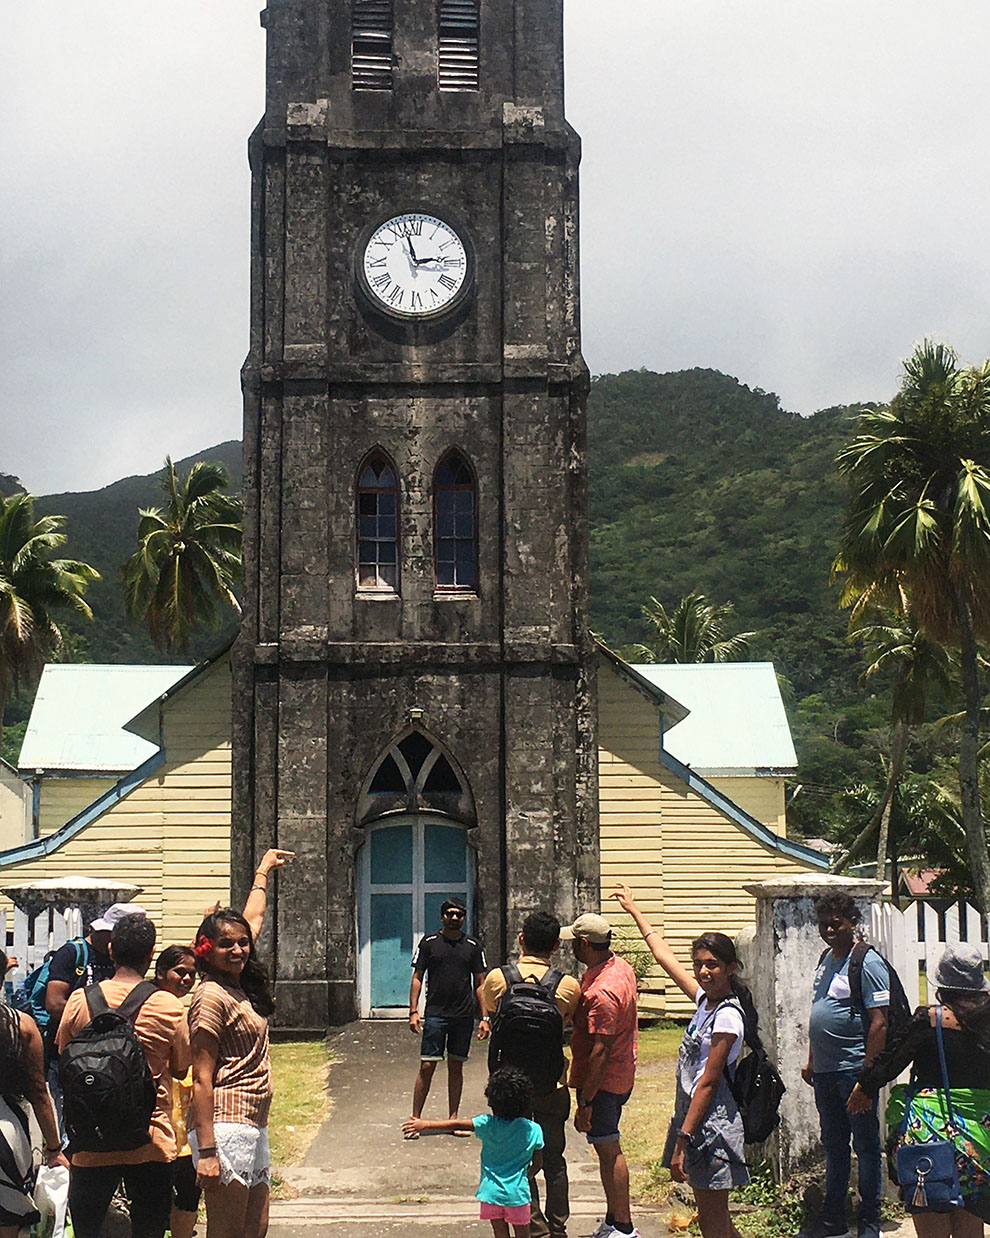 Sacred Heart Roman Catholic Church with a Clock tower in Levuka, the former colonial capital of Fiji